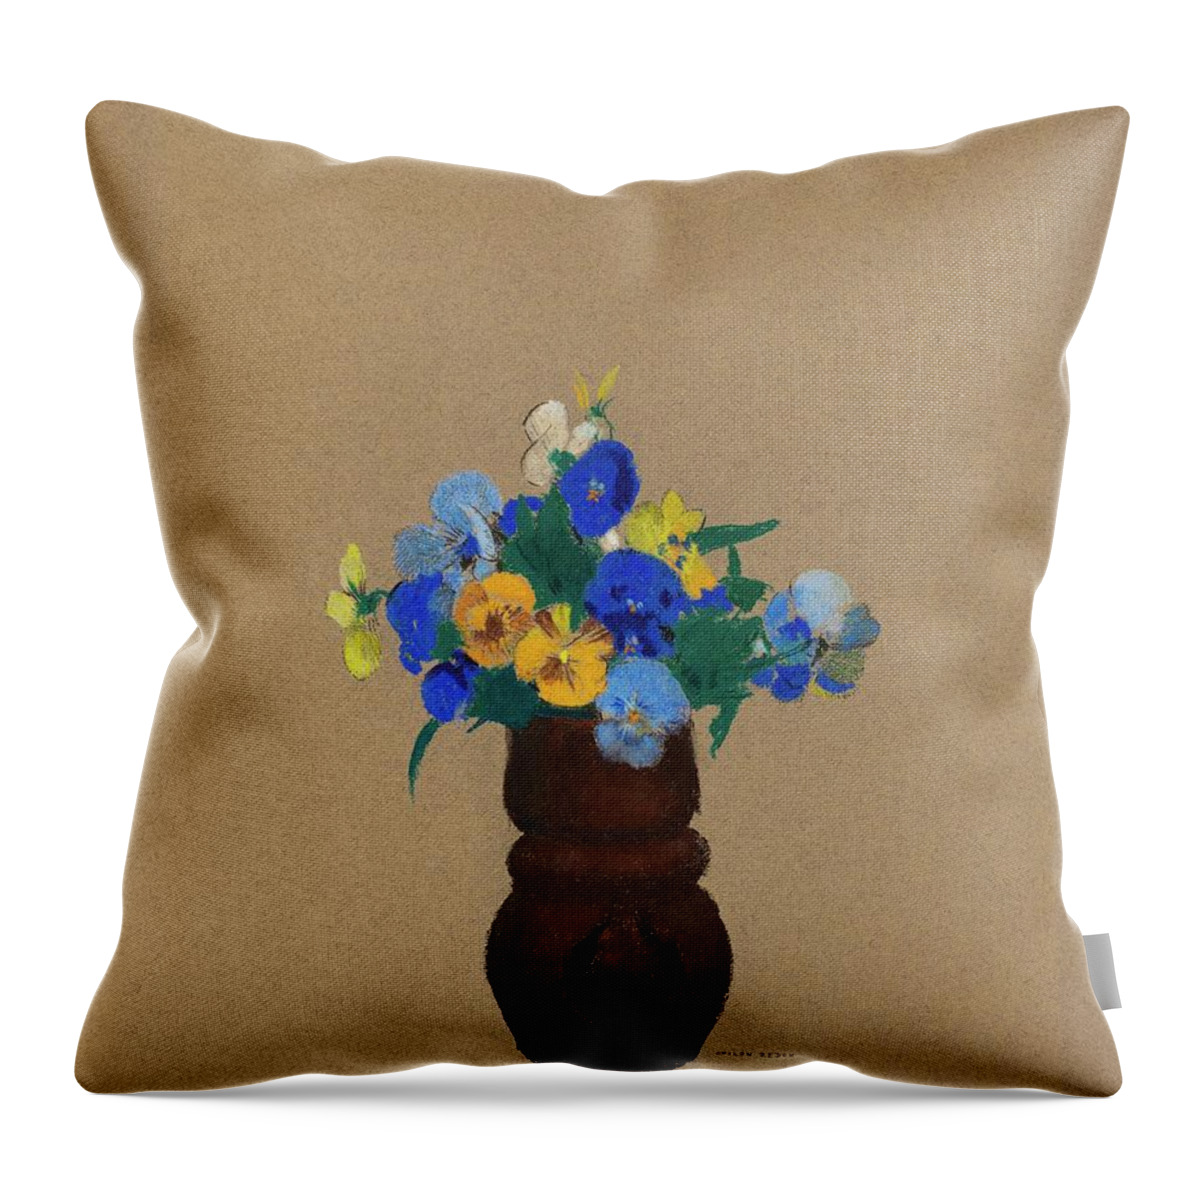 Pansies Throw Pillow featuring the painting Pansies #7 by Odilon Redon